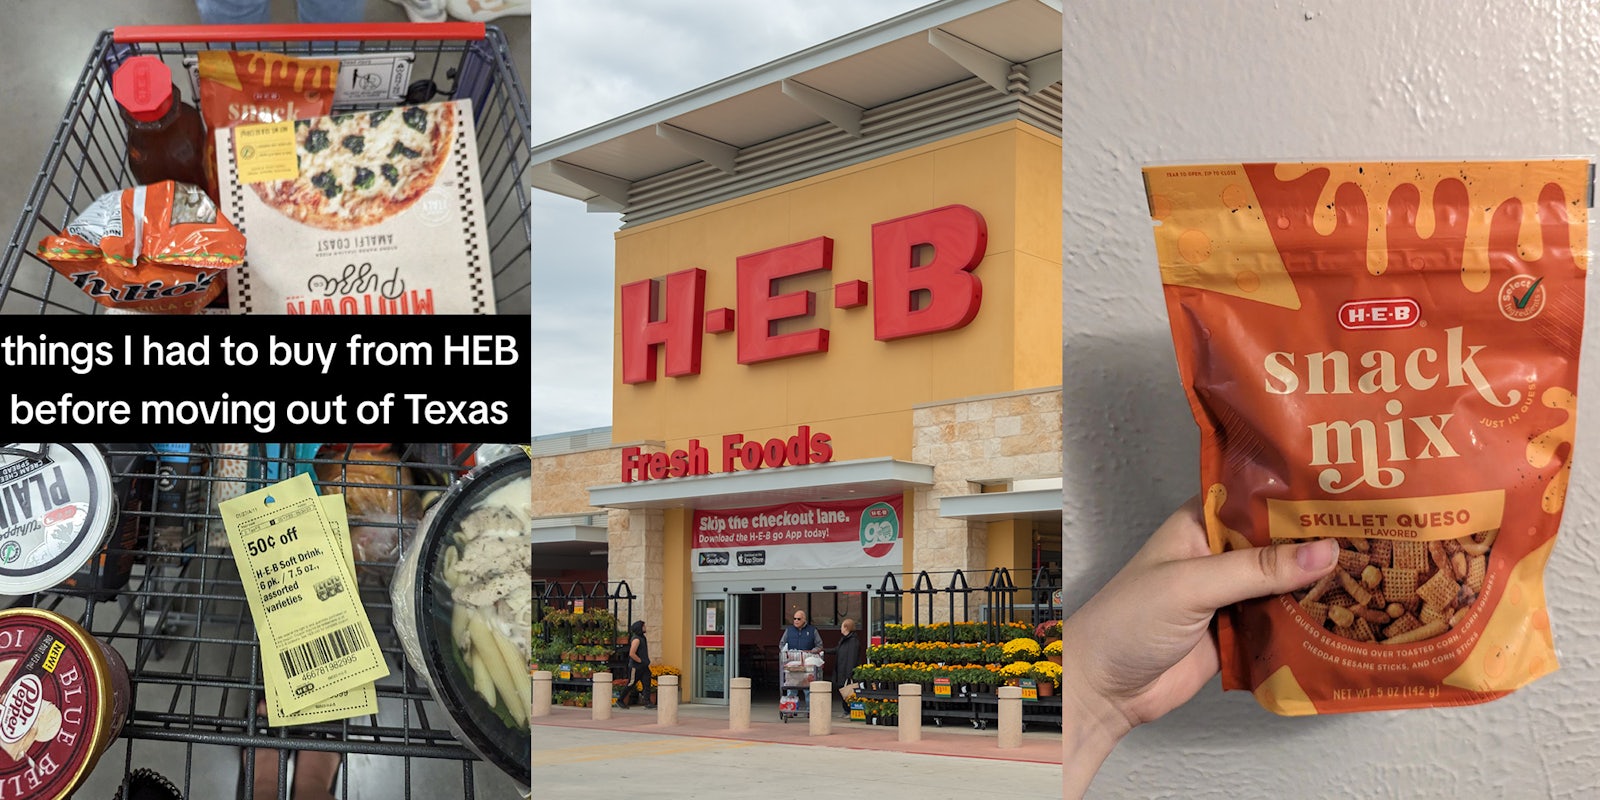 HEB PRODUCTS IN CART; Entrance of the HEB Supermarket store